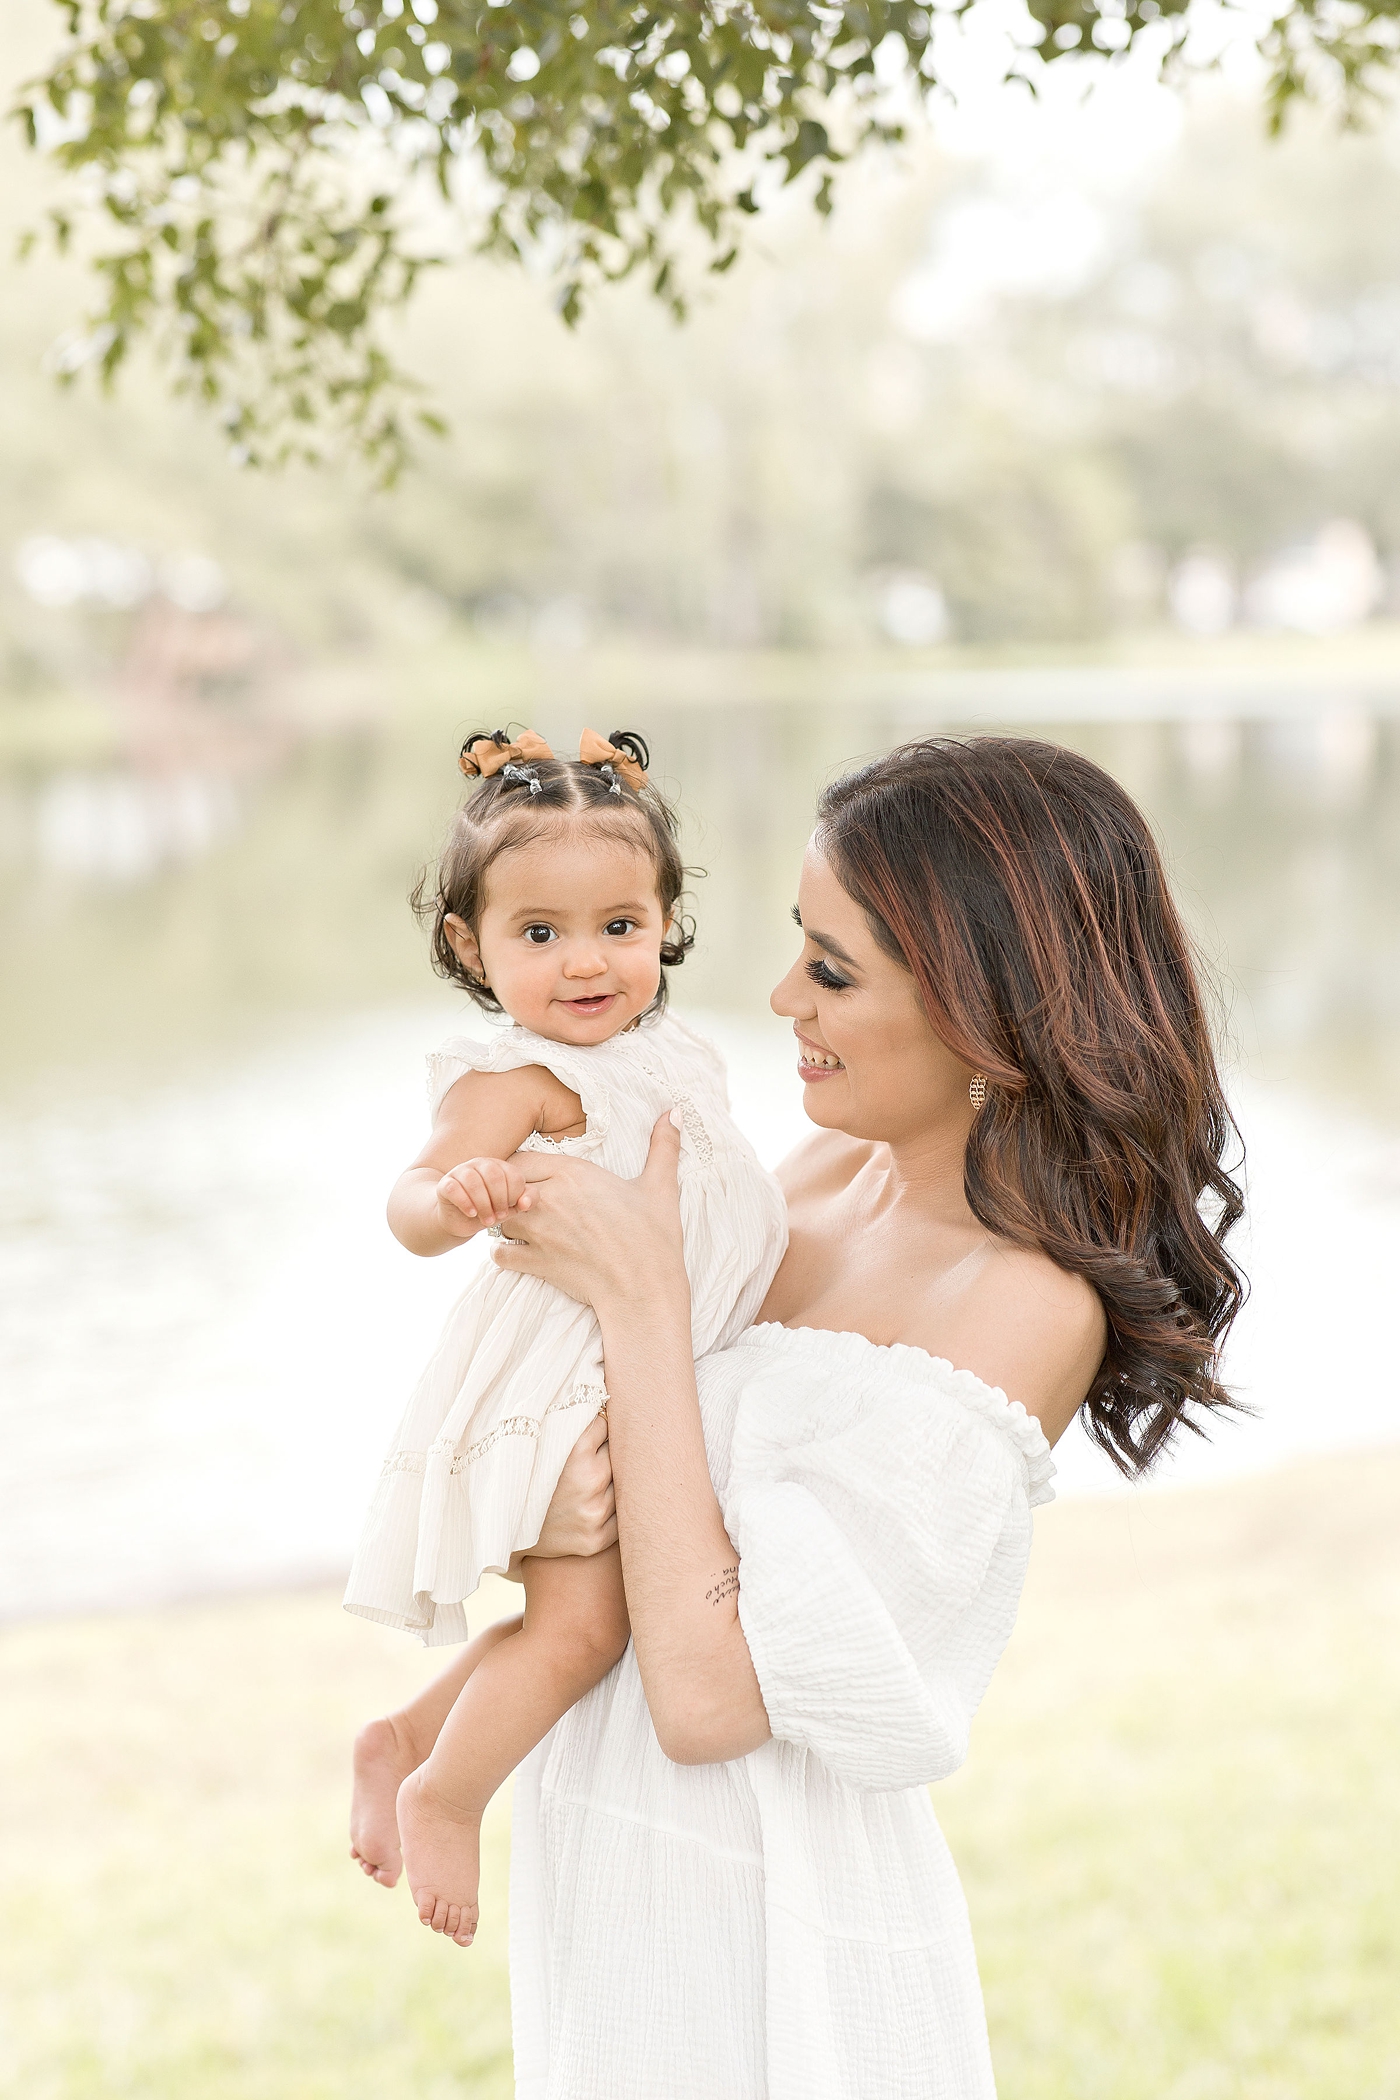 Mom holds up baby girl during baby photography miami session. Photo by Ivanna Vidal Photography.